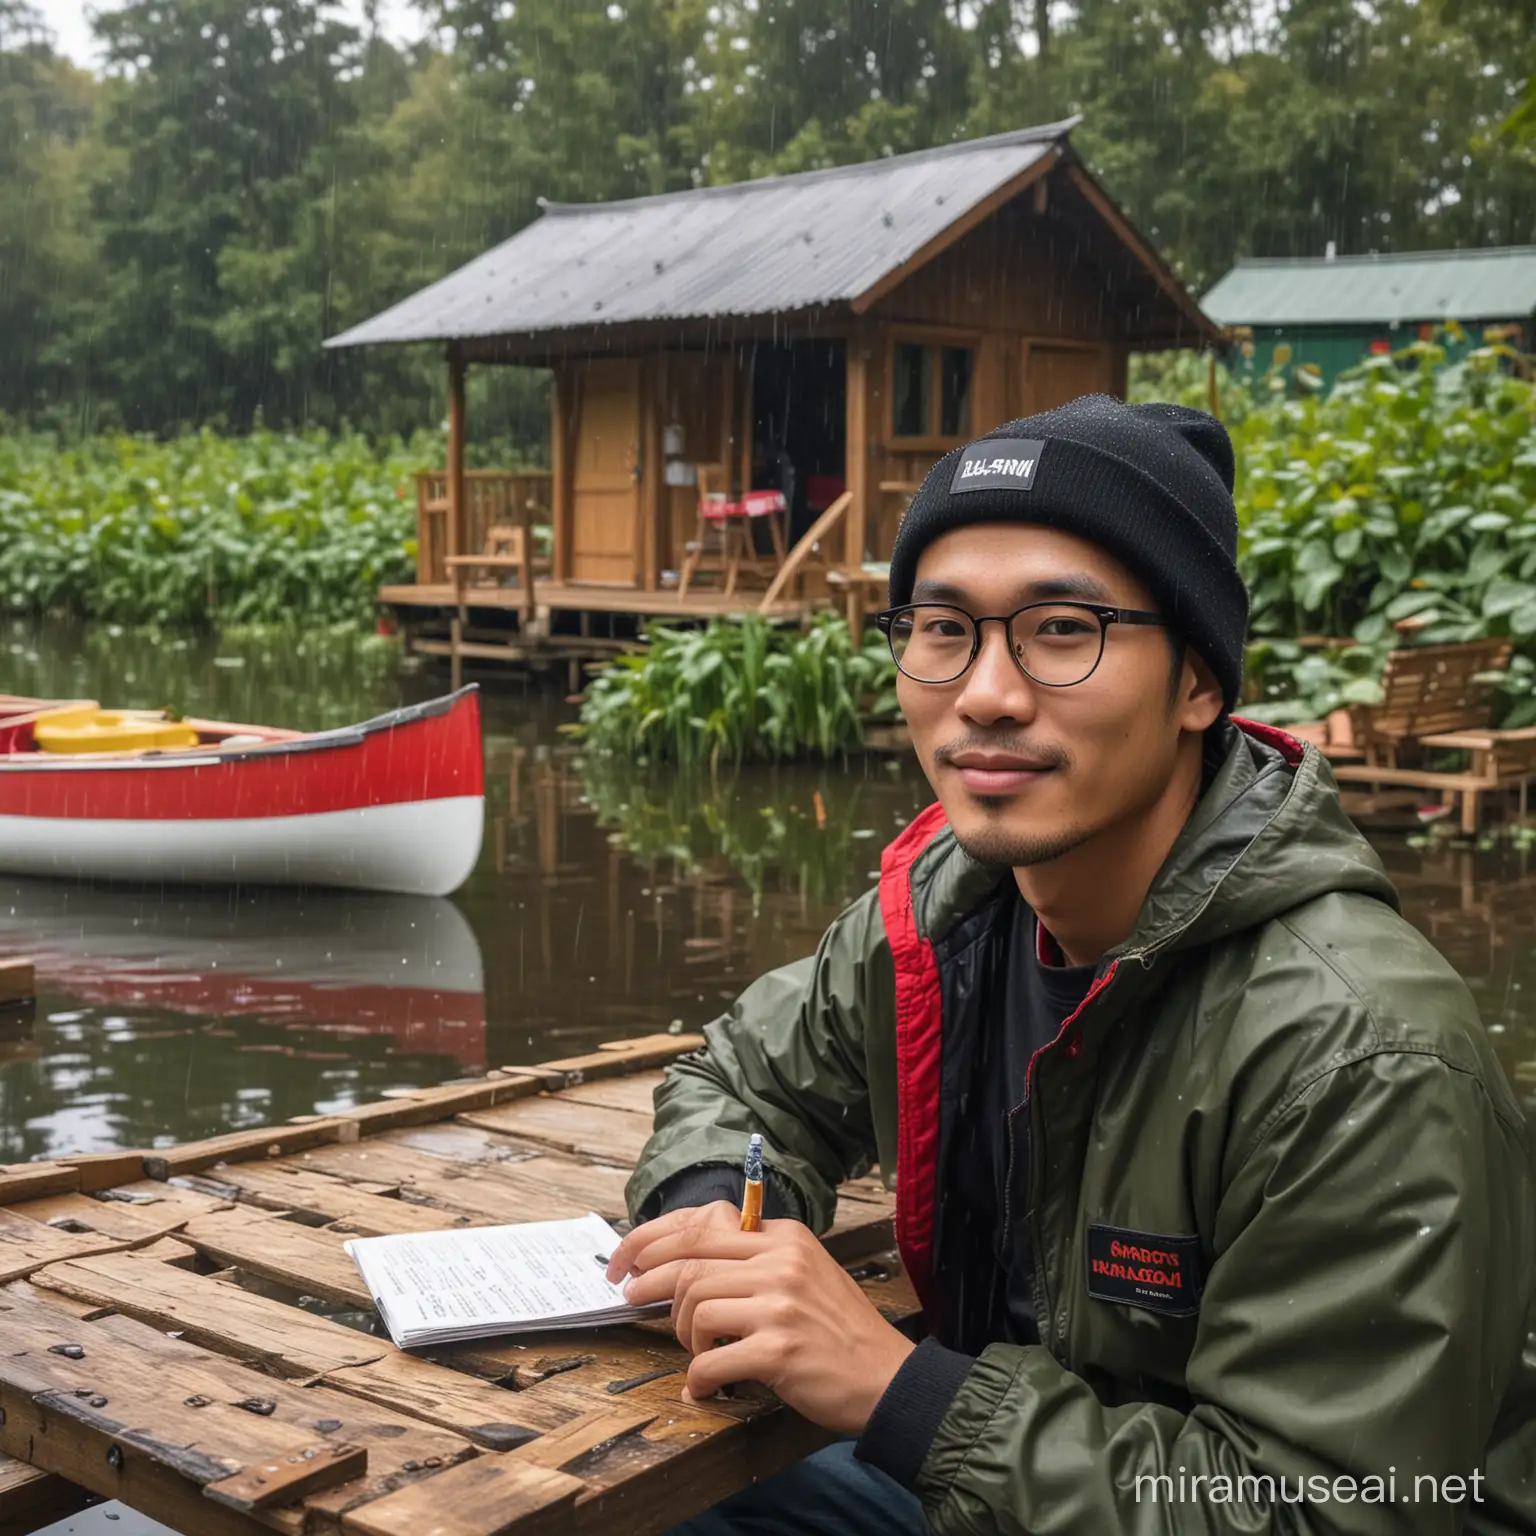 Stylish Asian Man in LeafRoofed Hut by Rainy Lake Urban Cool in Nature